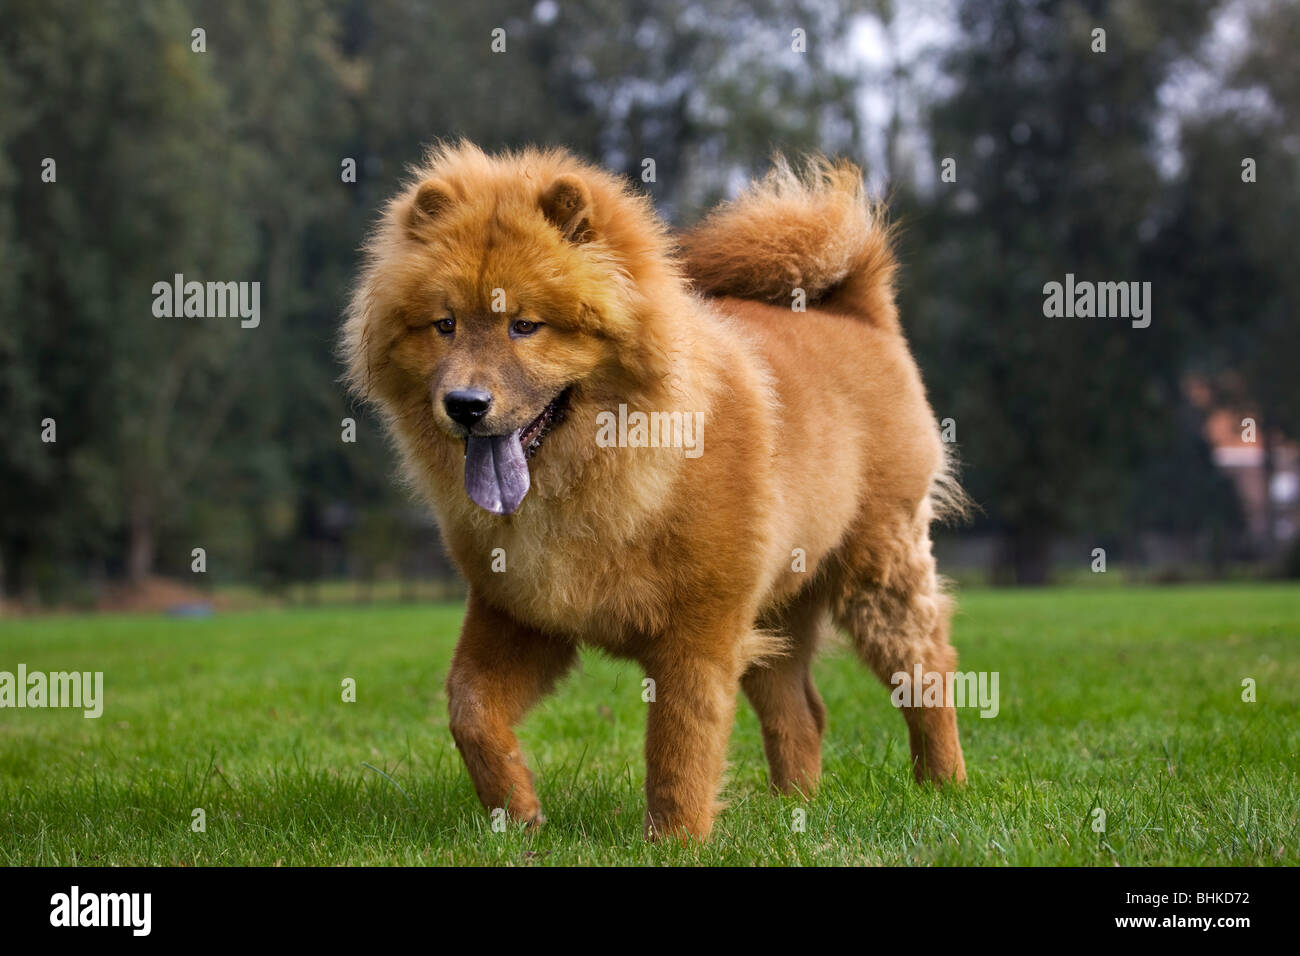 Chow Chow dog (Canis lupus familiaris) in garden Stock Photo